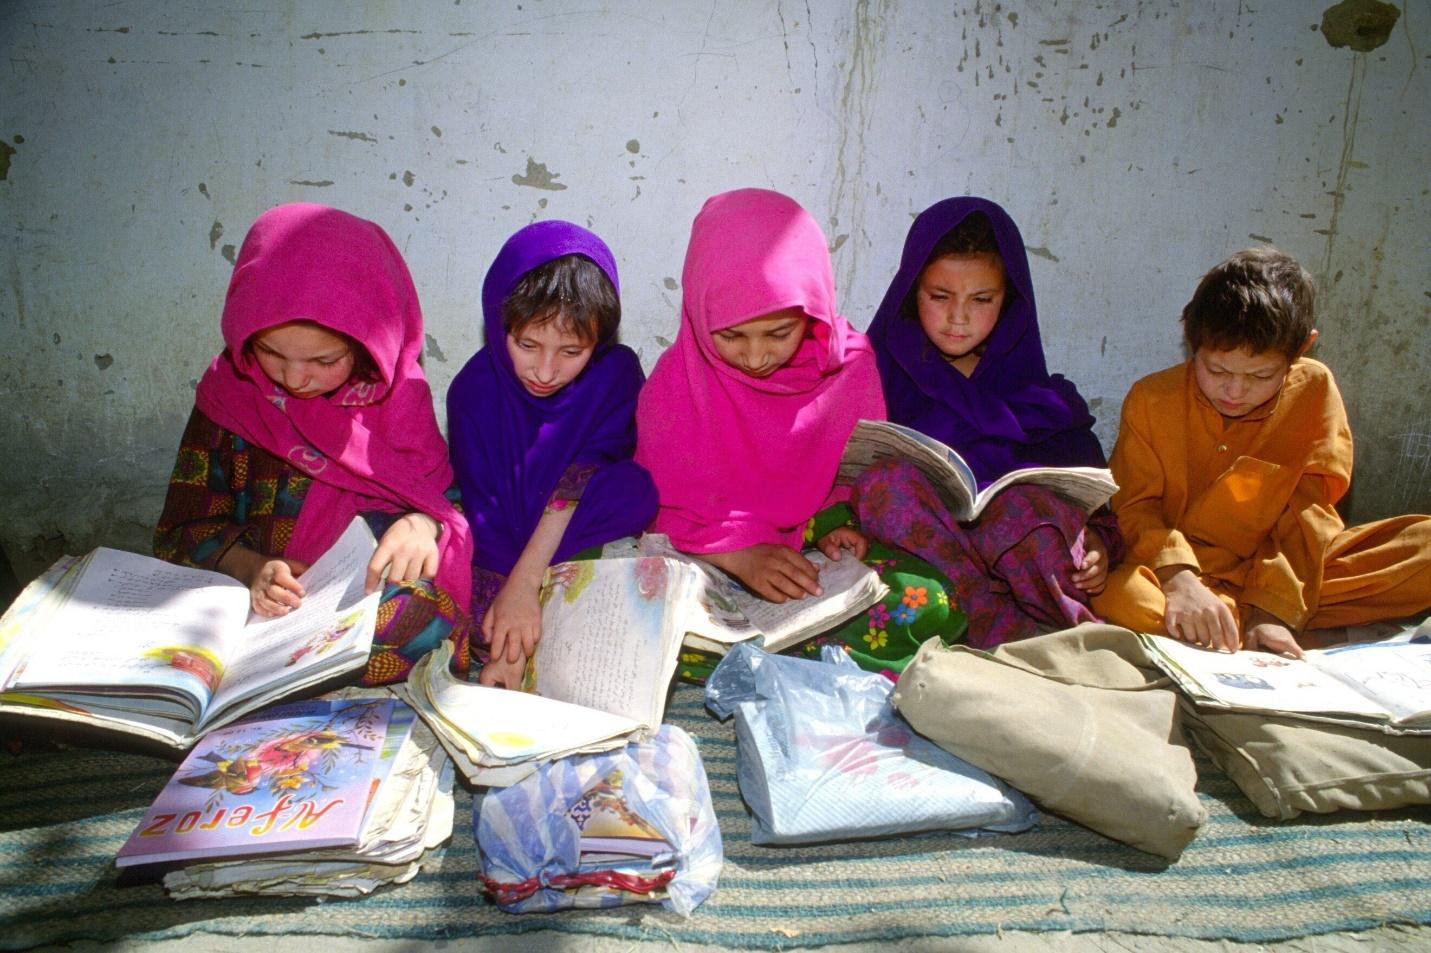 Education for all: For Pakistan, still a long road ahead